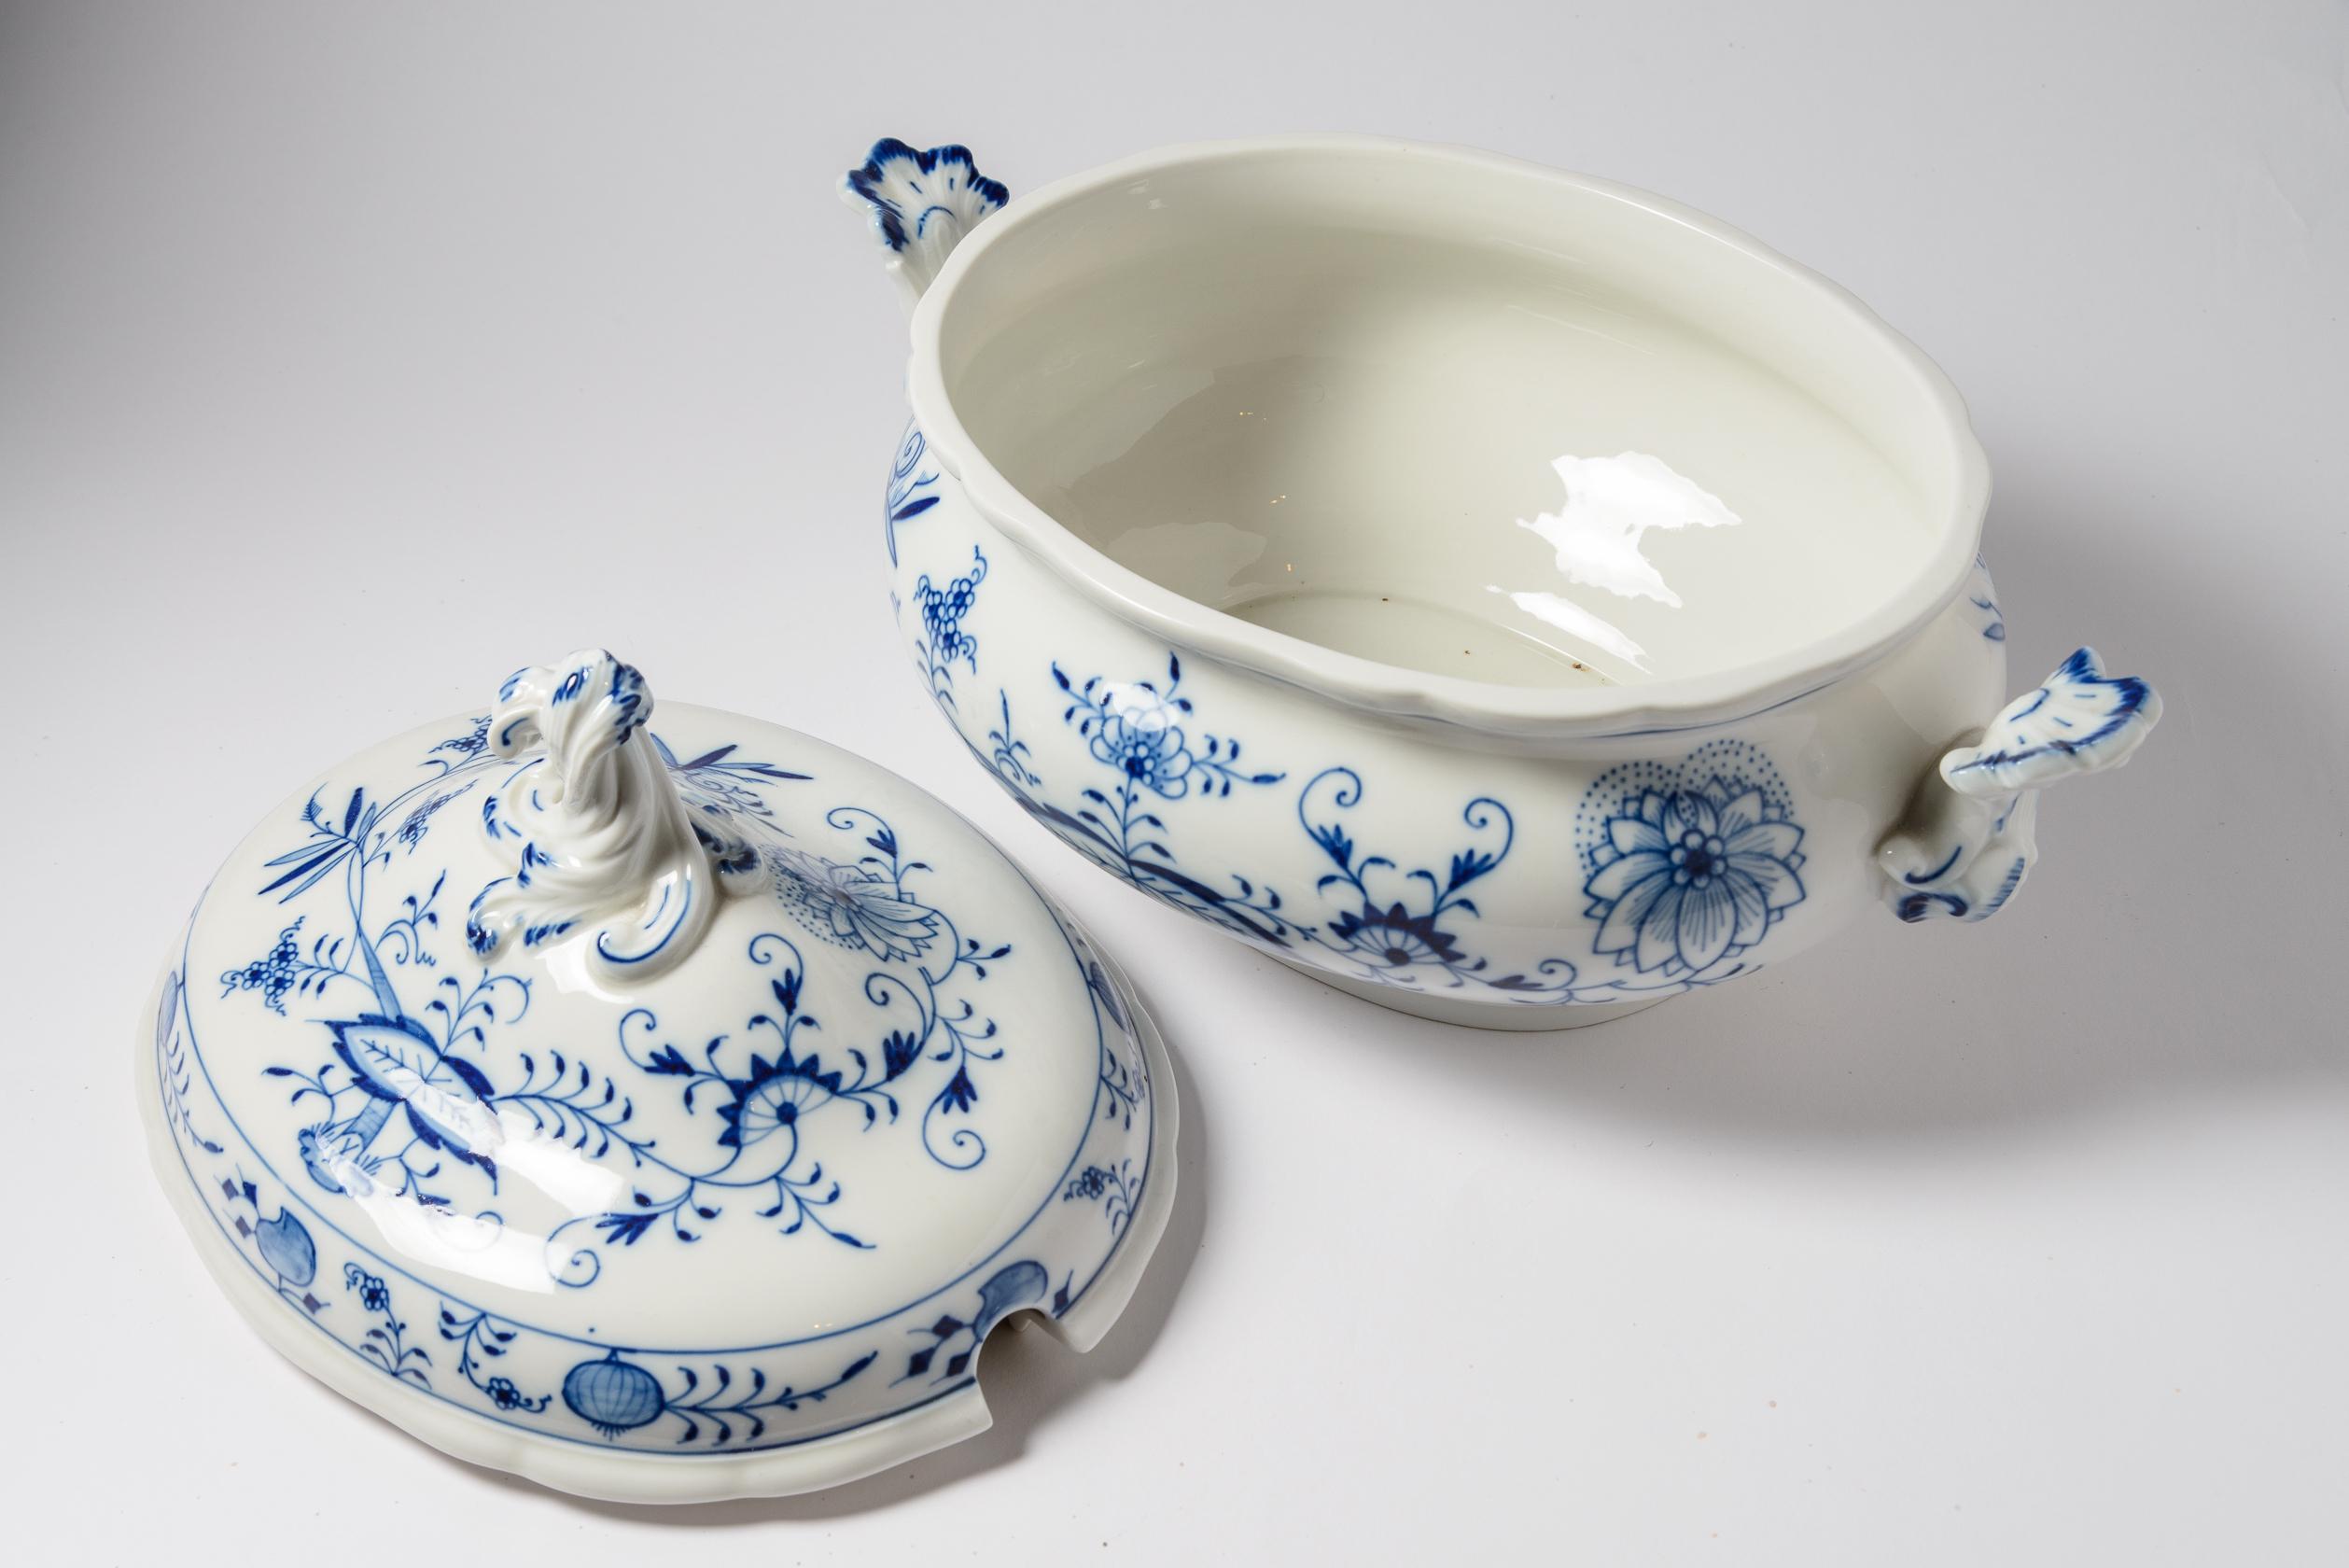 One of the most recognizable patterns, Meissen's Blue Onion. Meticulously hand painted by the artisans that learn for months to execute this crisp blue design. A great serving piece from entrees to soup and will make a beautiful centerpiece or